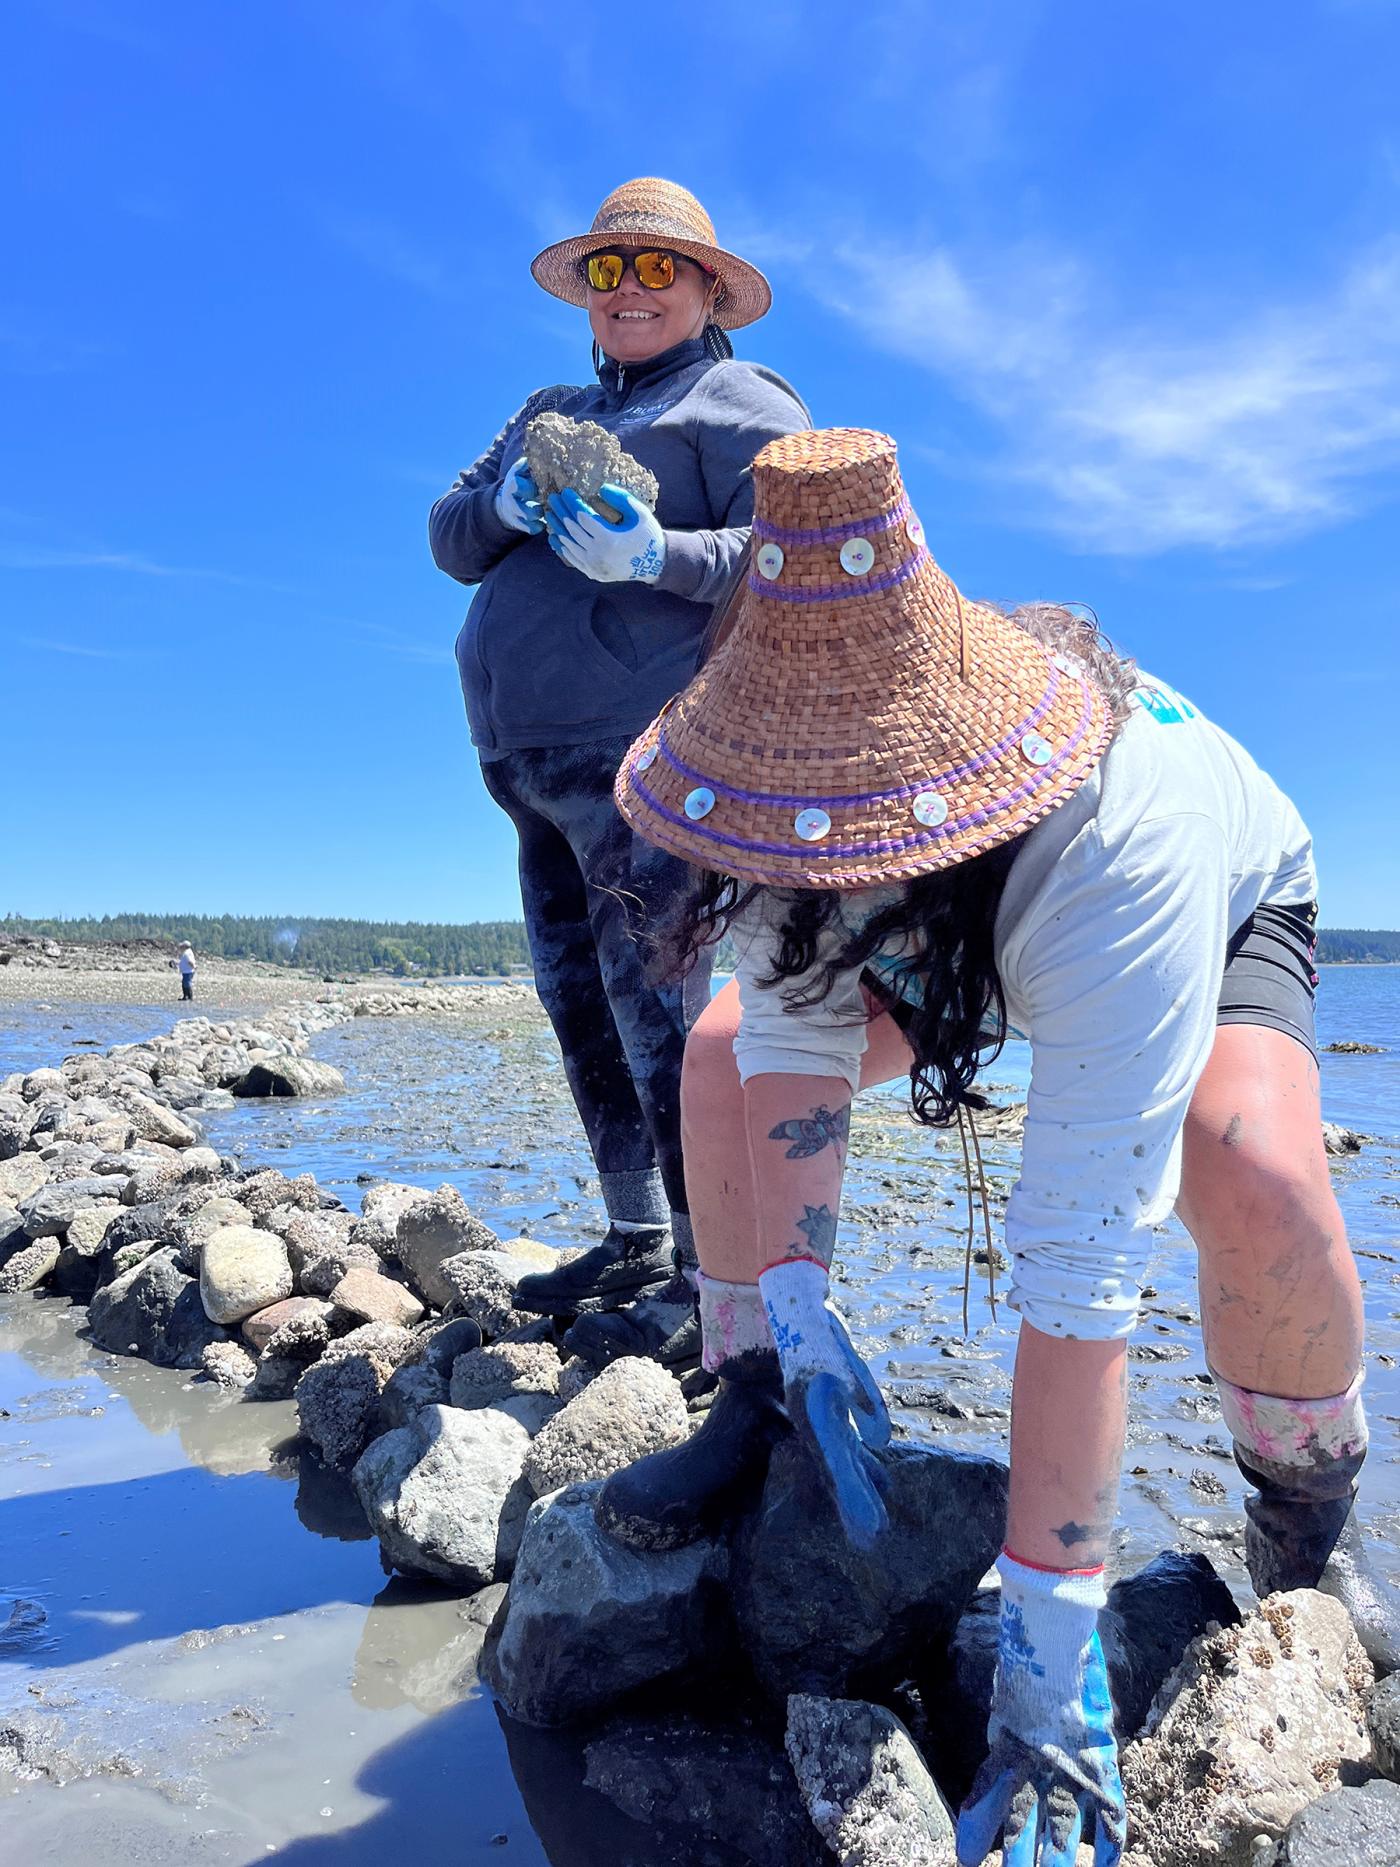 Swinomish Indian Tribal Community members, Josephine Jefferson and Alana Quintasket, add rocks to the clam garden wall during a gathering of Indigenous aquaculture practitioners. Photo Credit: Swinomish Fisheries Department. 